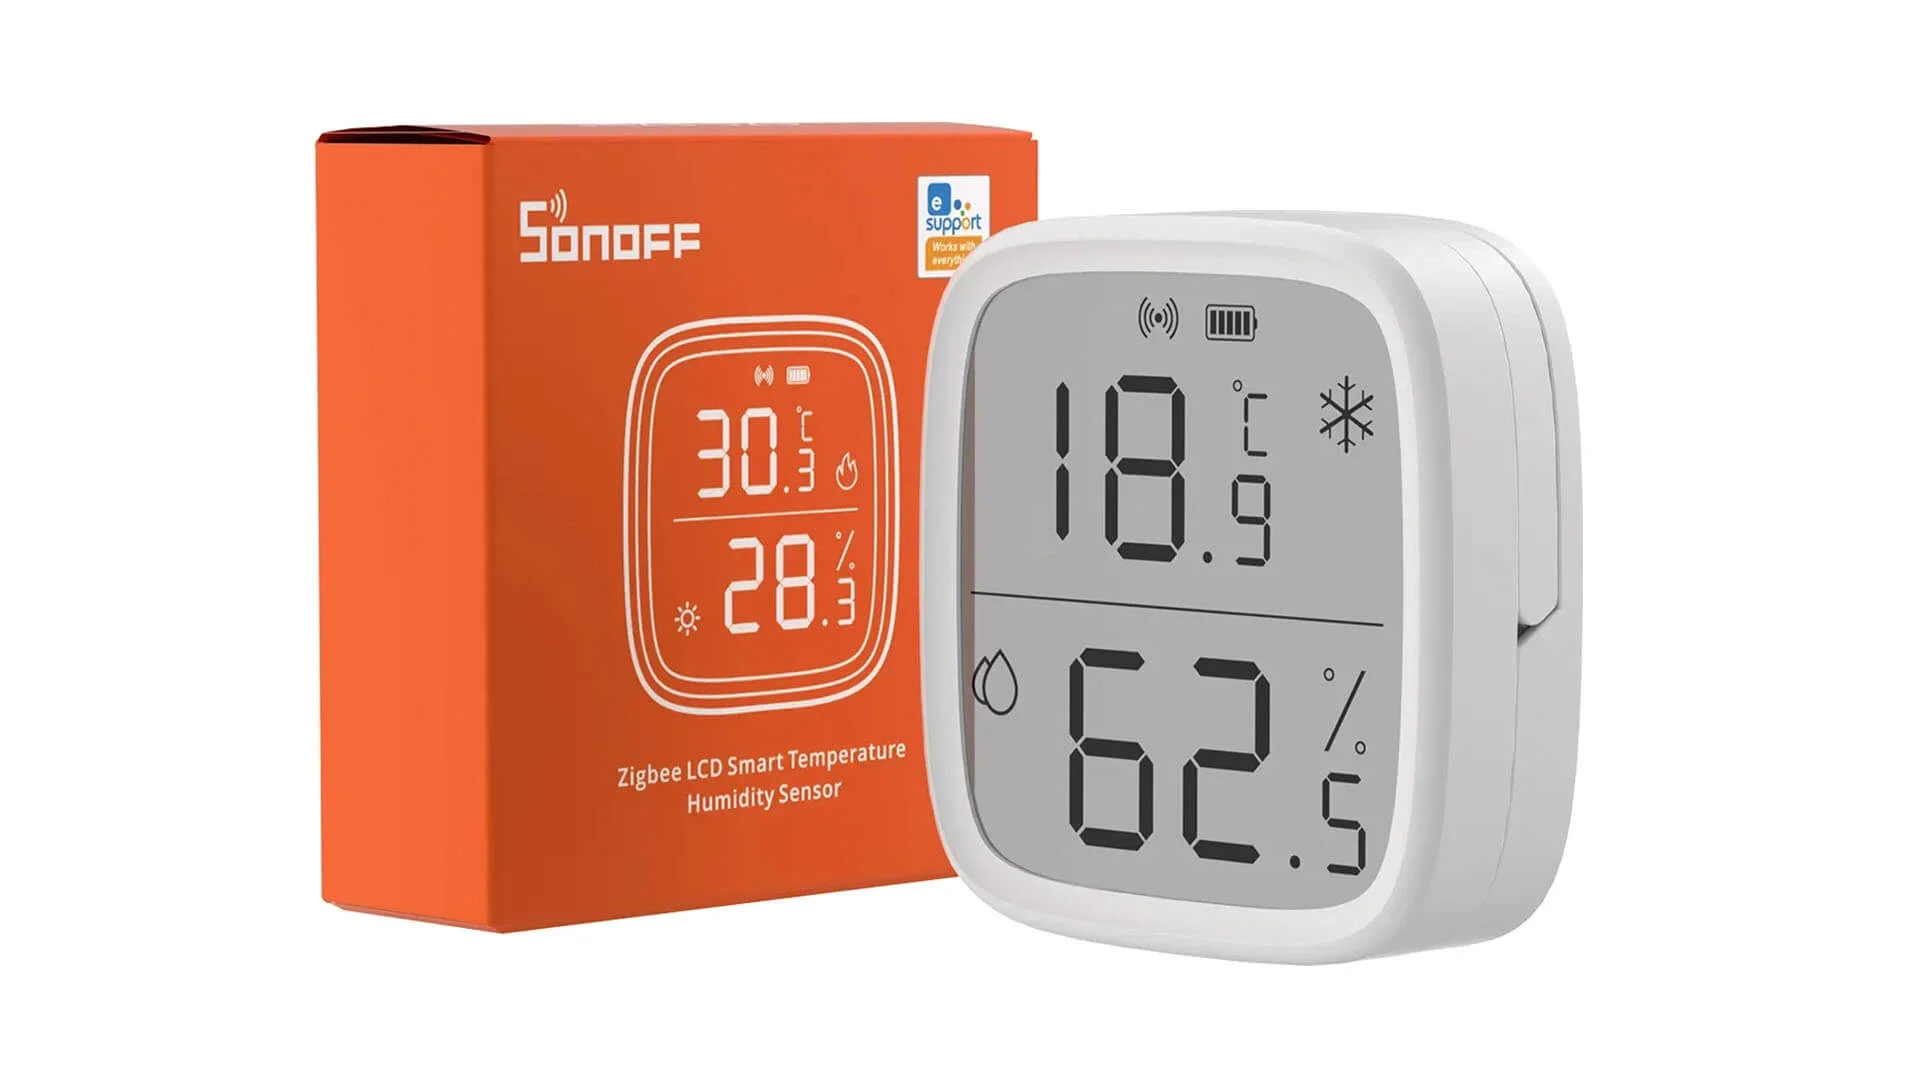 https://smarthomescene.com/wp-content/uploads/2023/04/sonoff-temperature-and-humidity-snzb-02-buy.jpg.webp